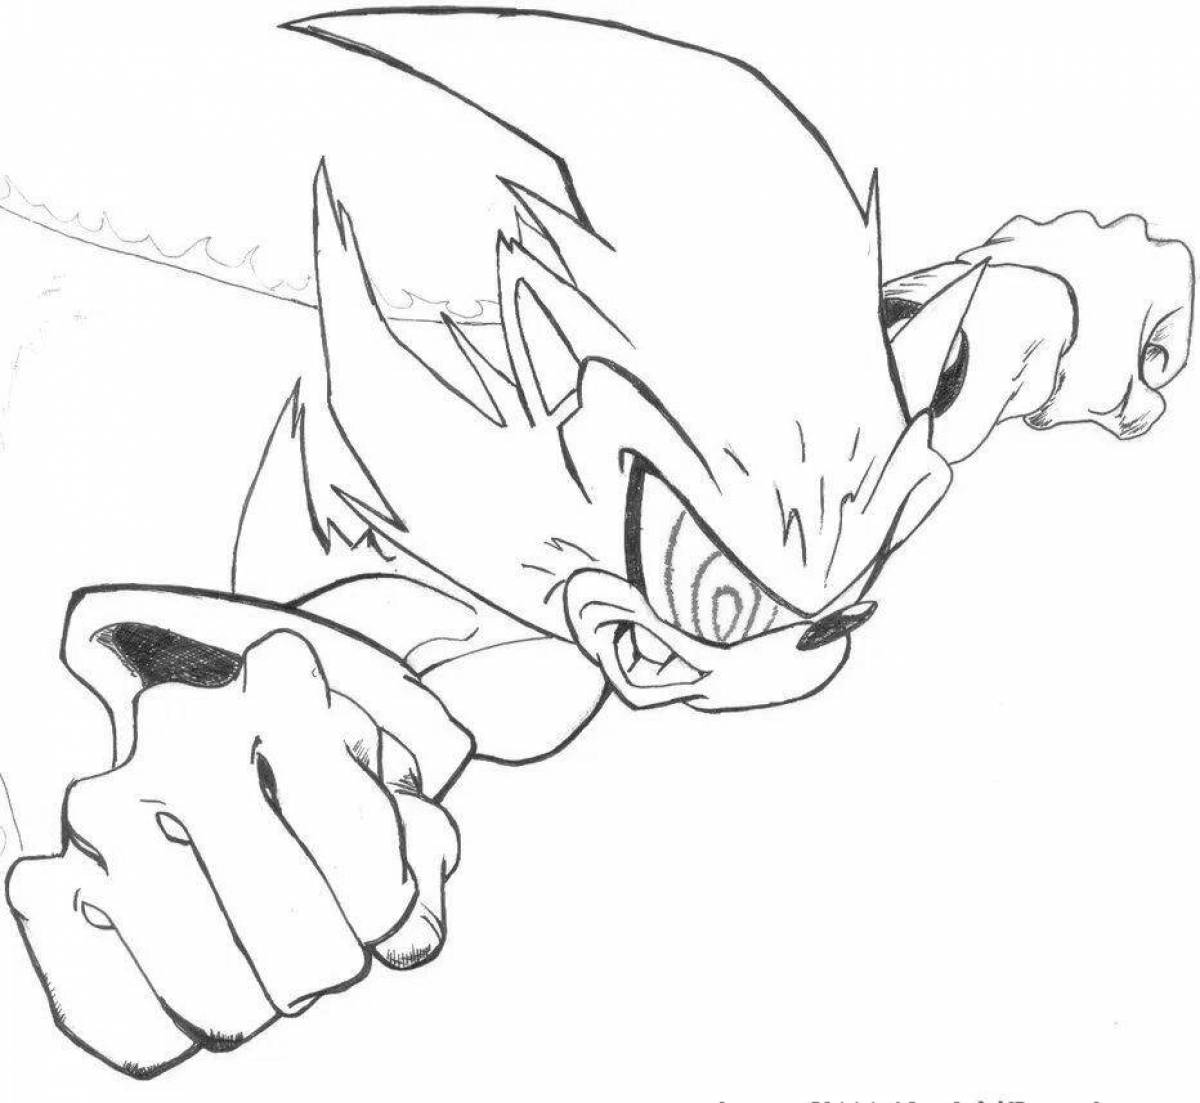 Charming sonic exe fnf coloring book